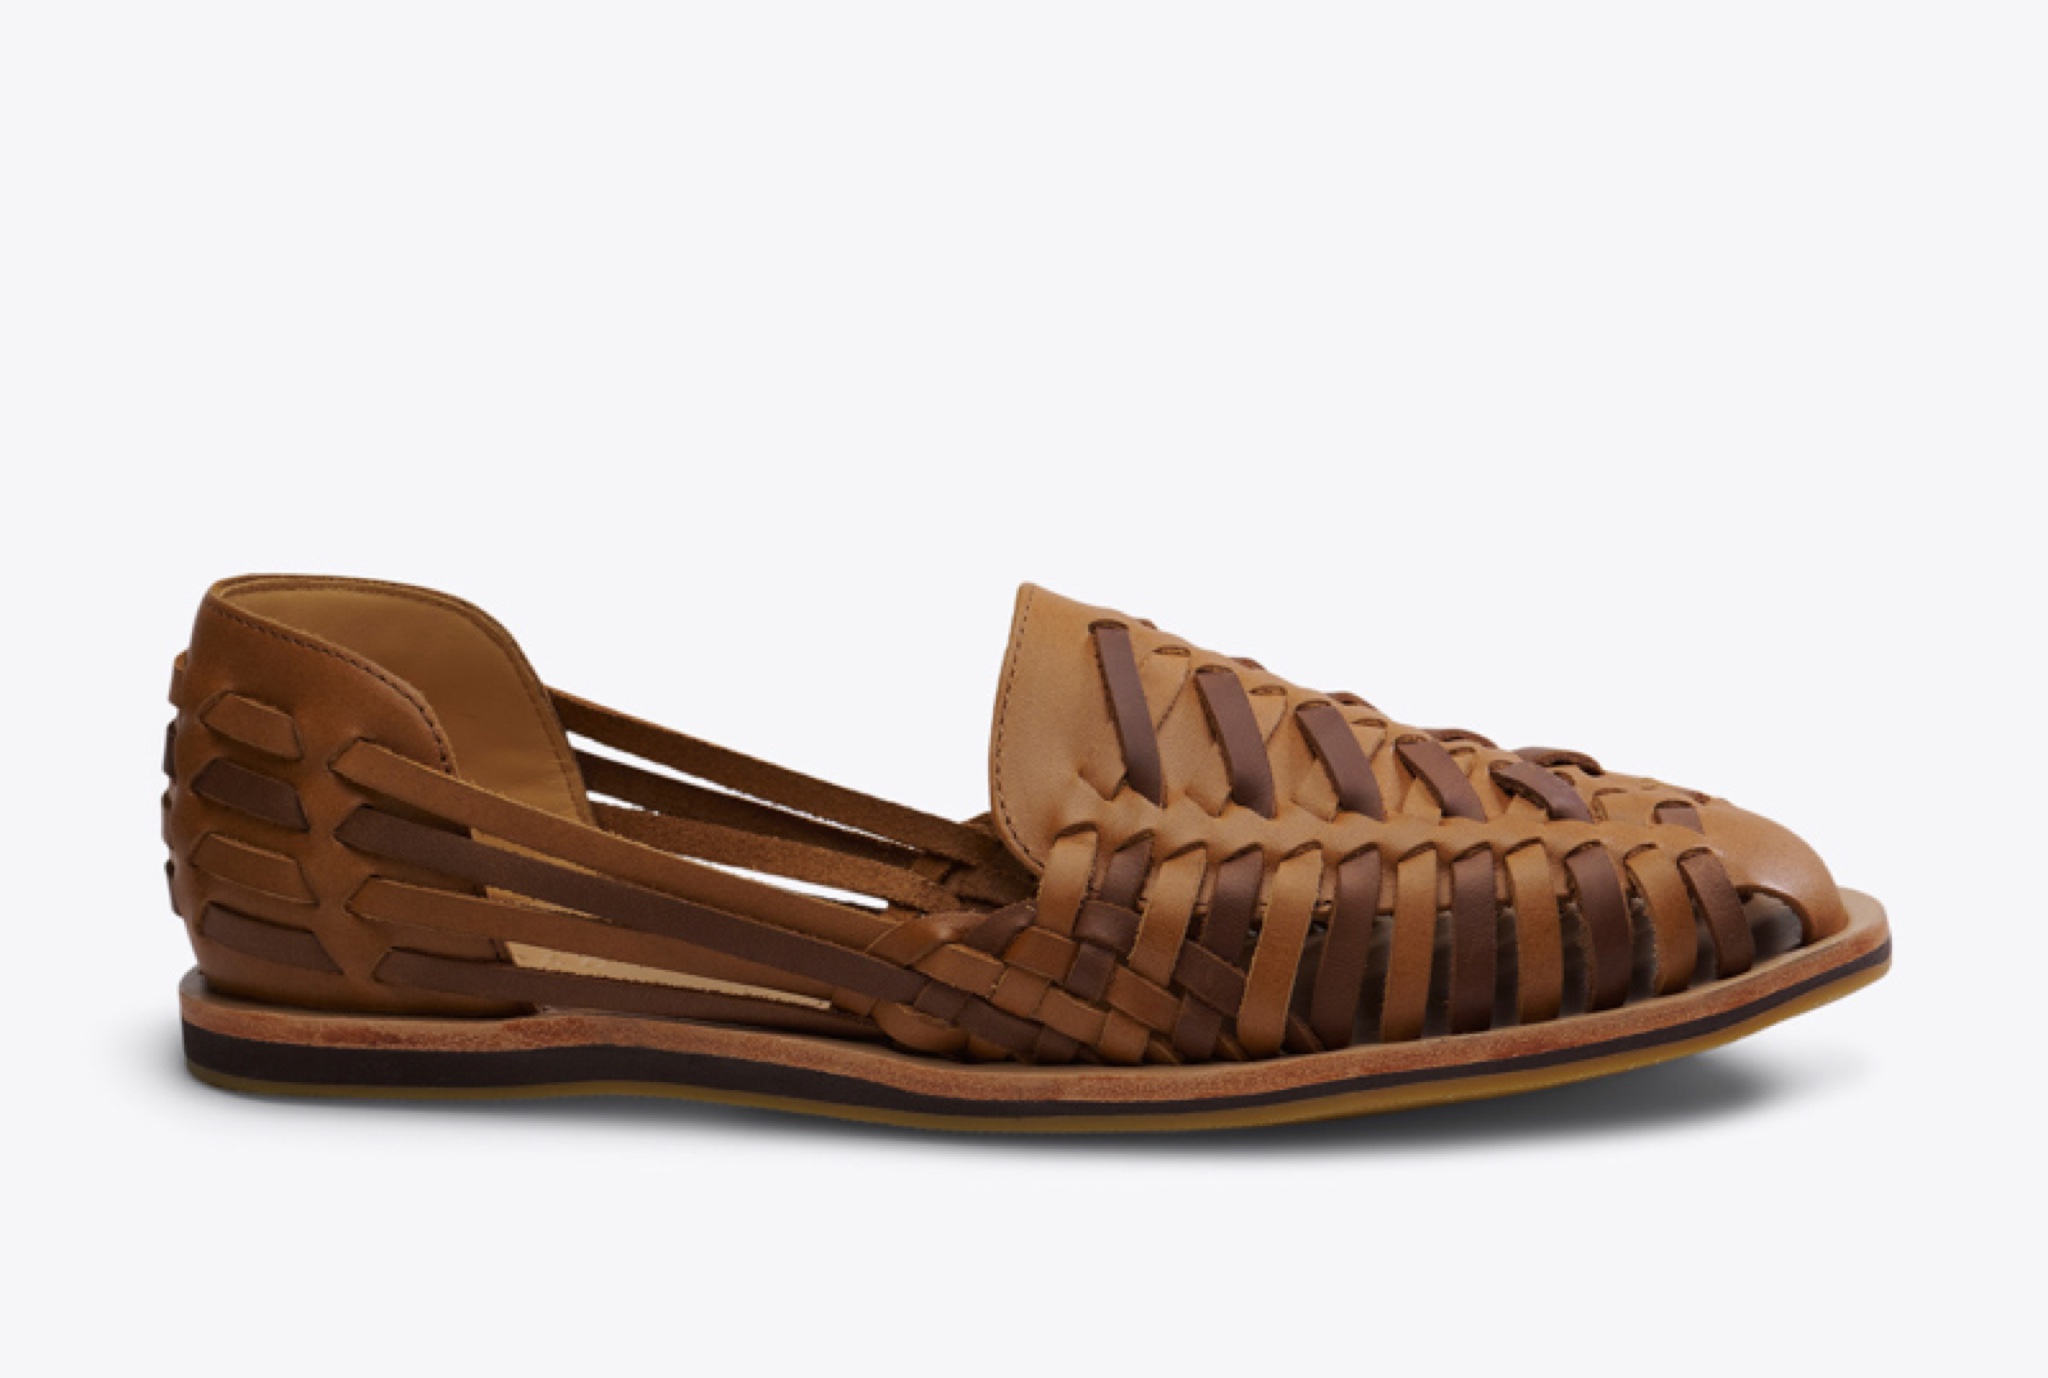 Nisolo Men's Huarache Sandal Saddle Brown/Brown Colorblock - Every Nisolo product is built on the foundation of comfort, function, and design. 